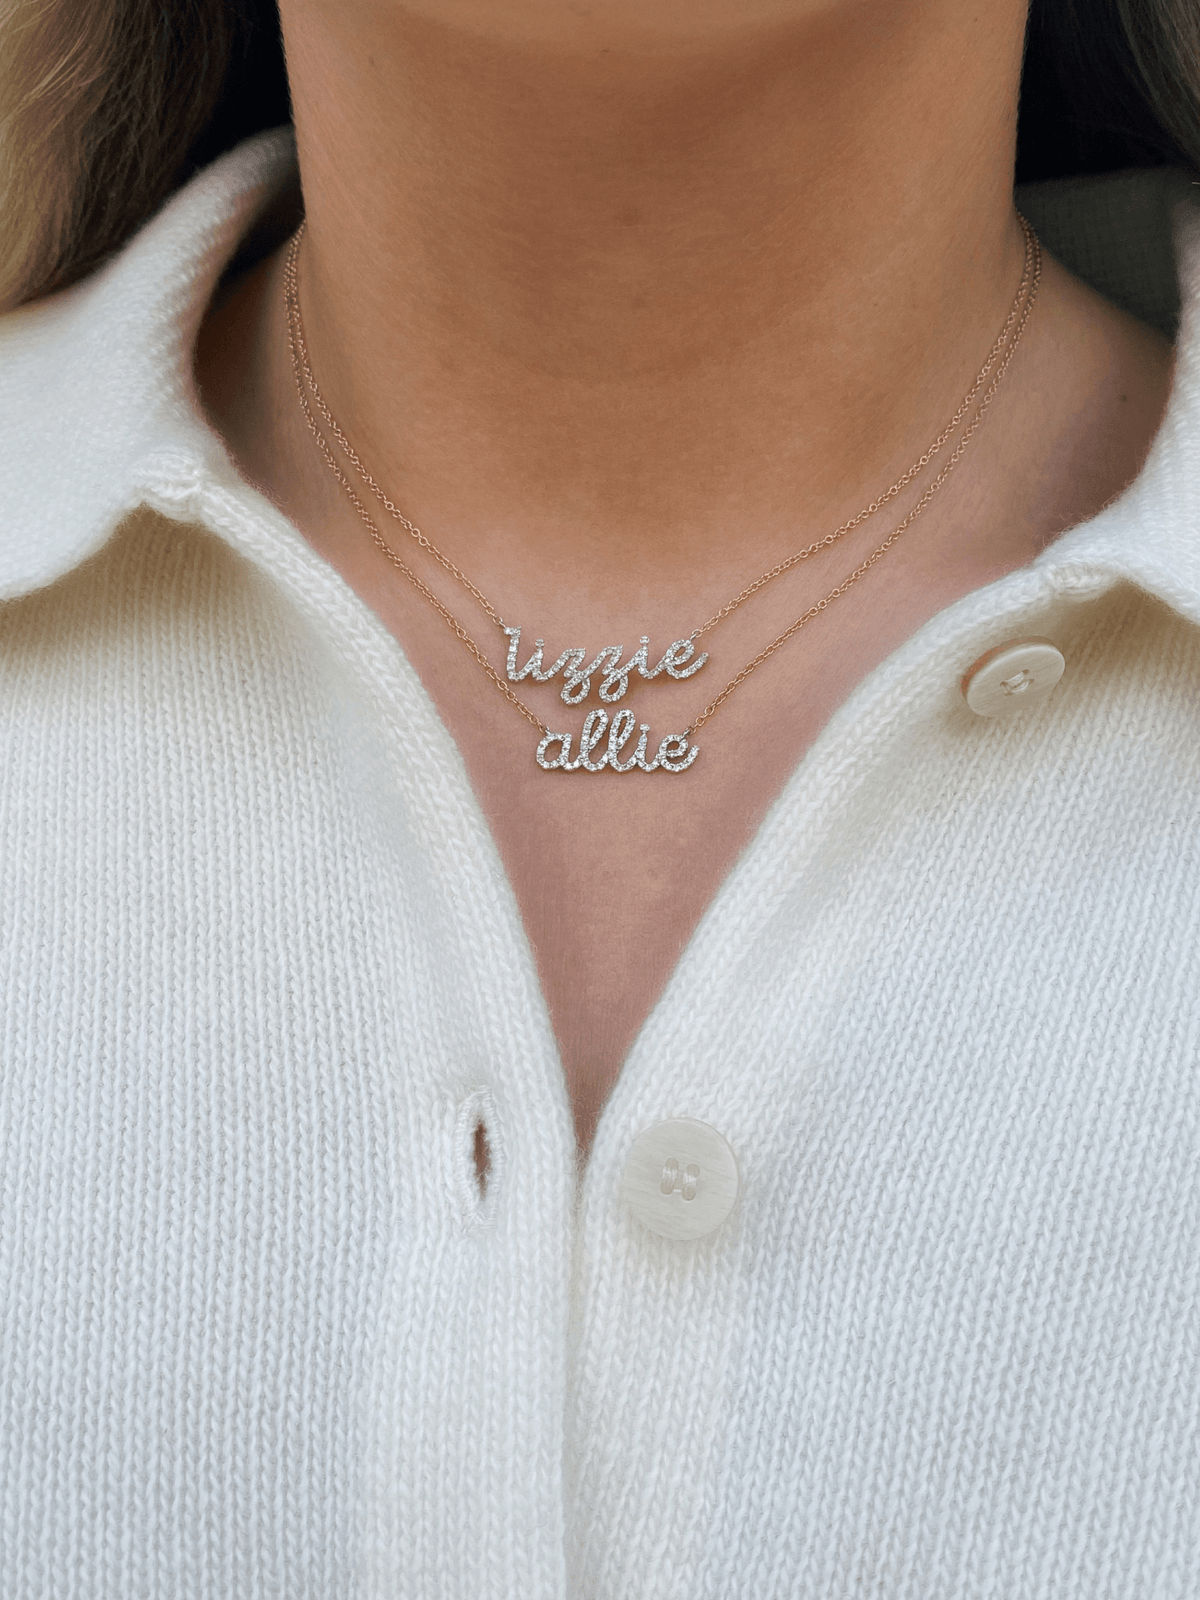 Two 14K diamond name charm necklaces on dainty gold chains